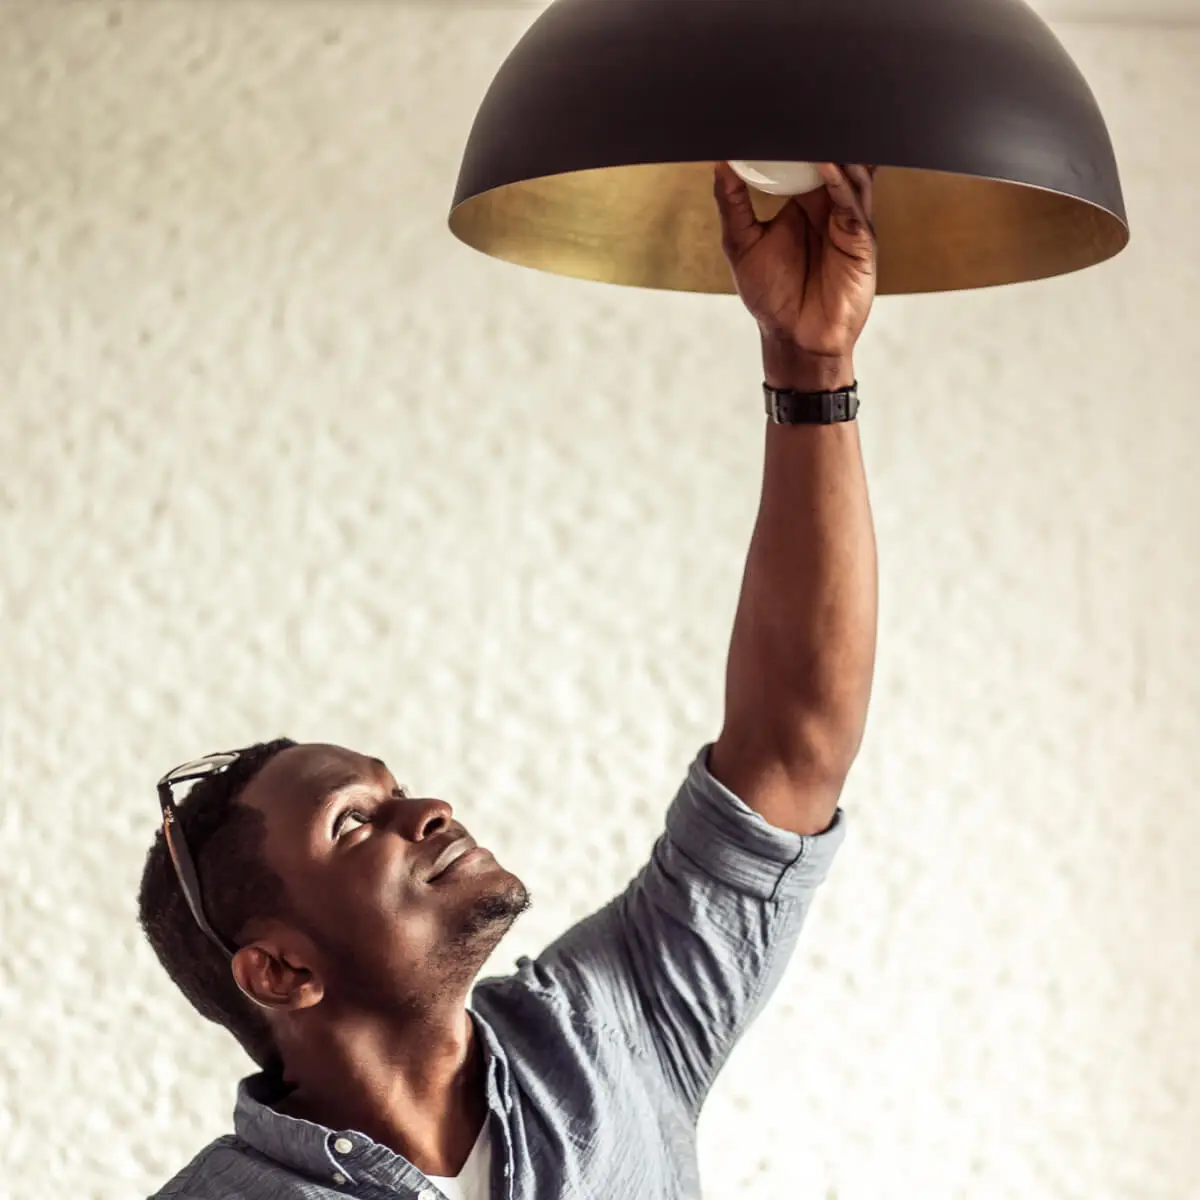 Young smiling man with glasses perched on top of his head, reaches up to a ceiling light to replace it's bulb.